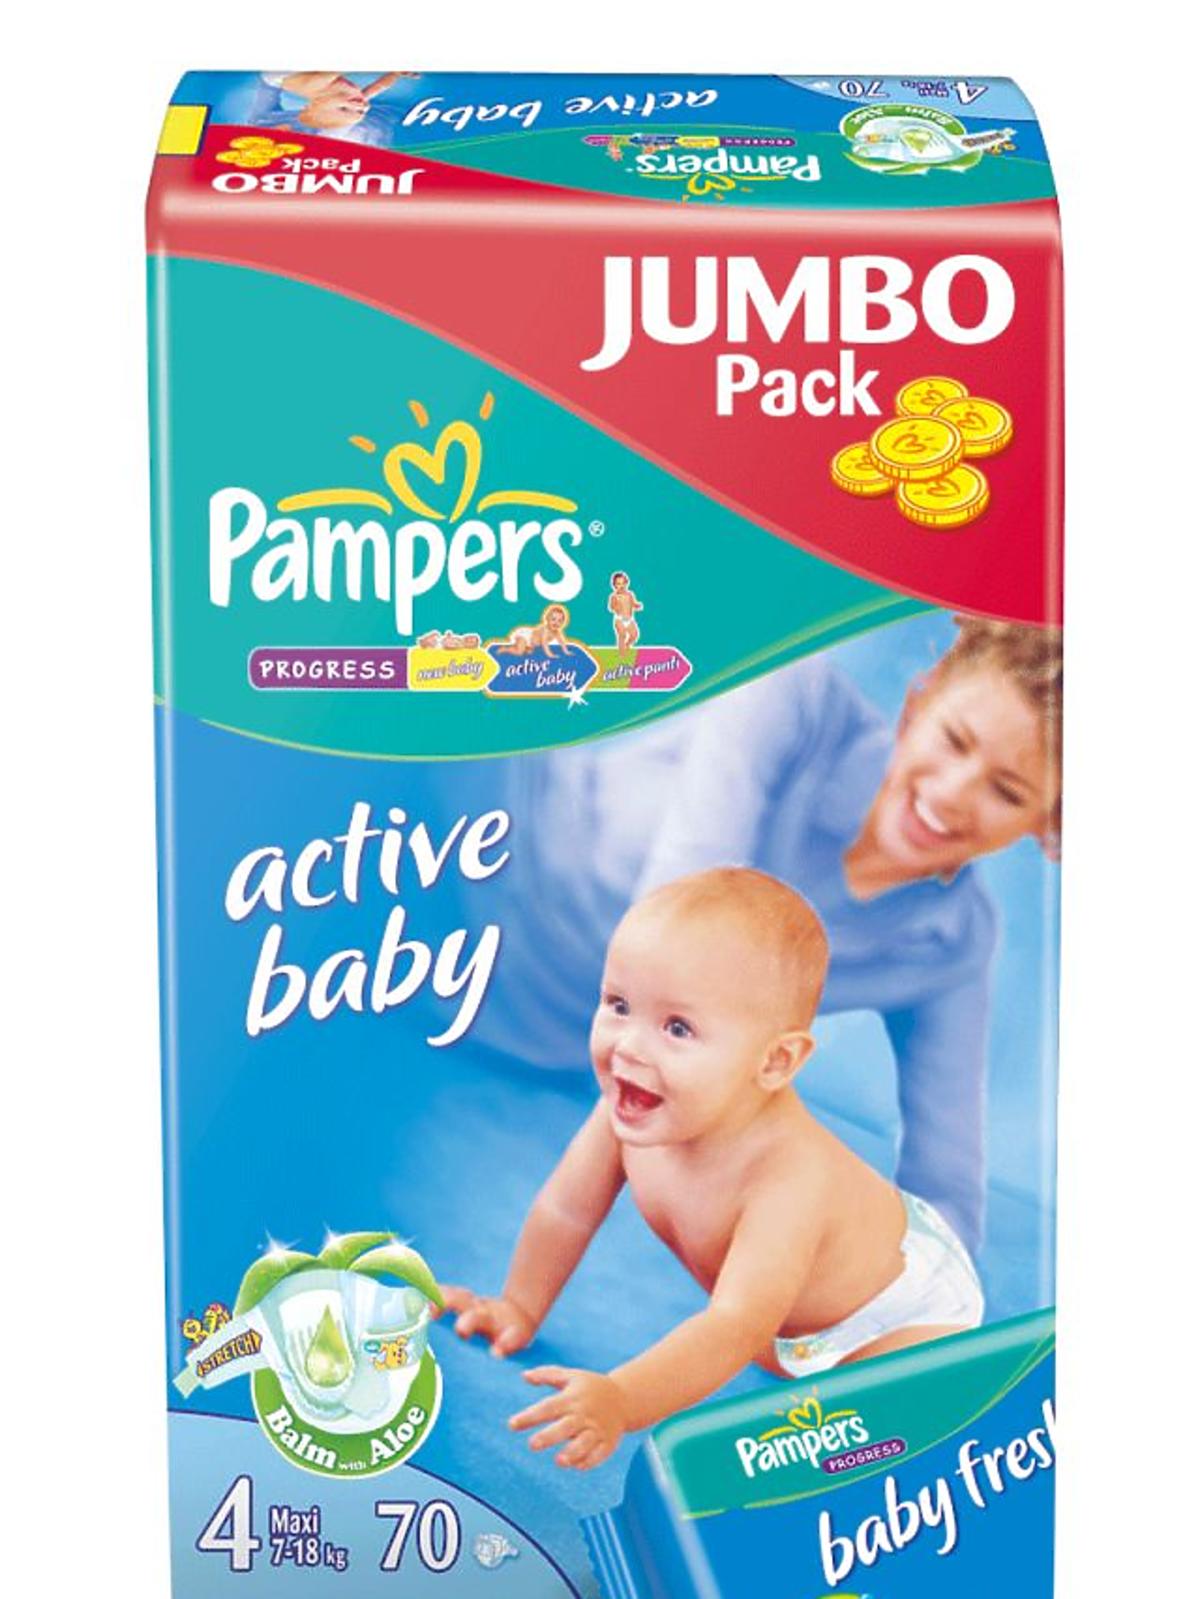 Pampers-Active-Baby-diaper&wipes-DO-DRUKU.gif